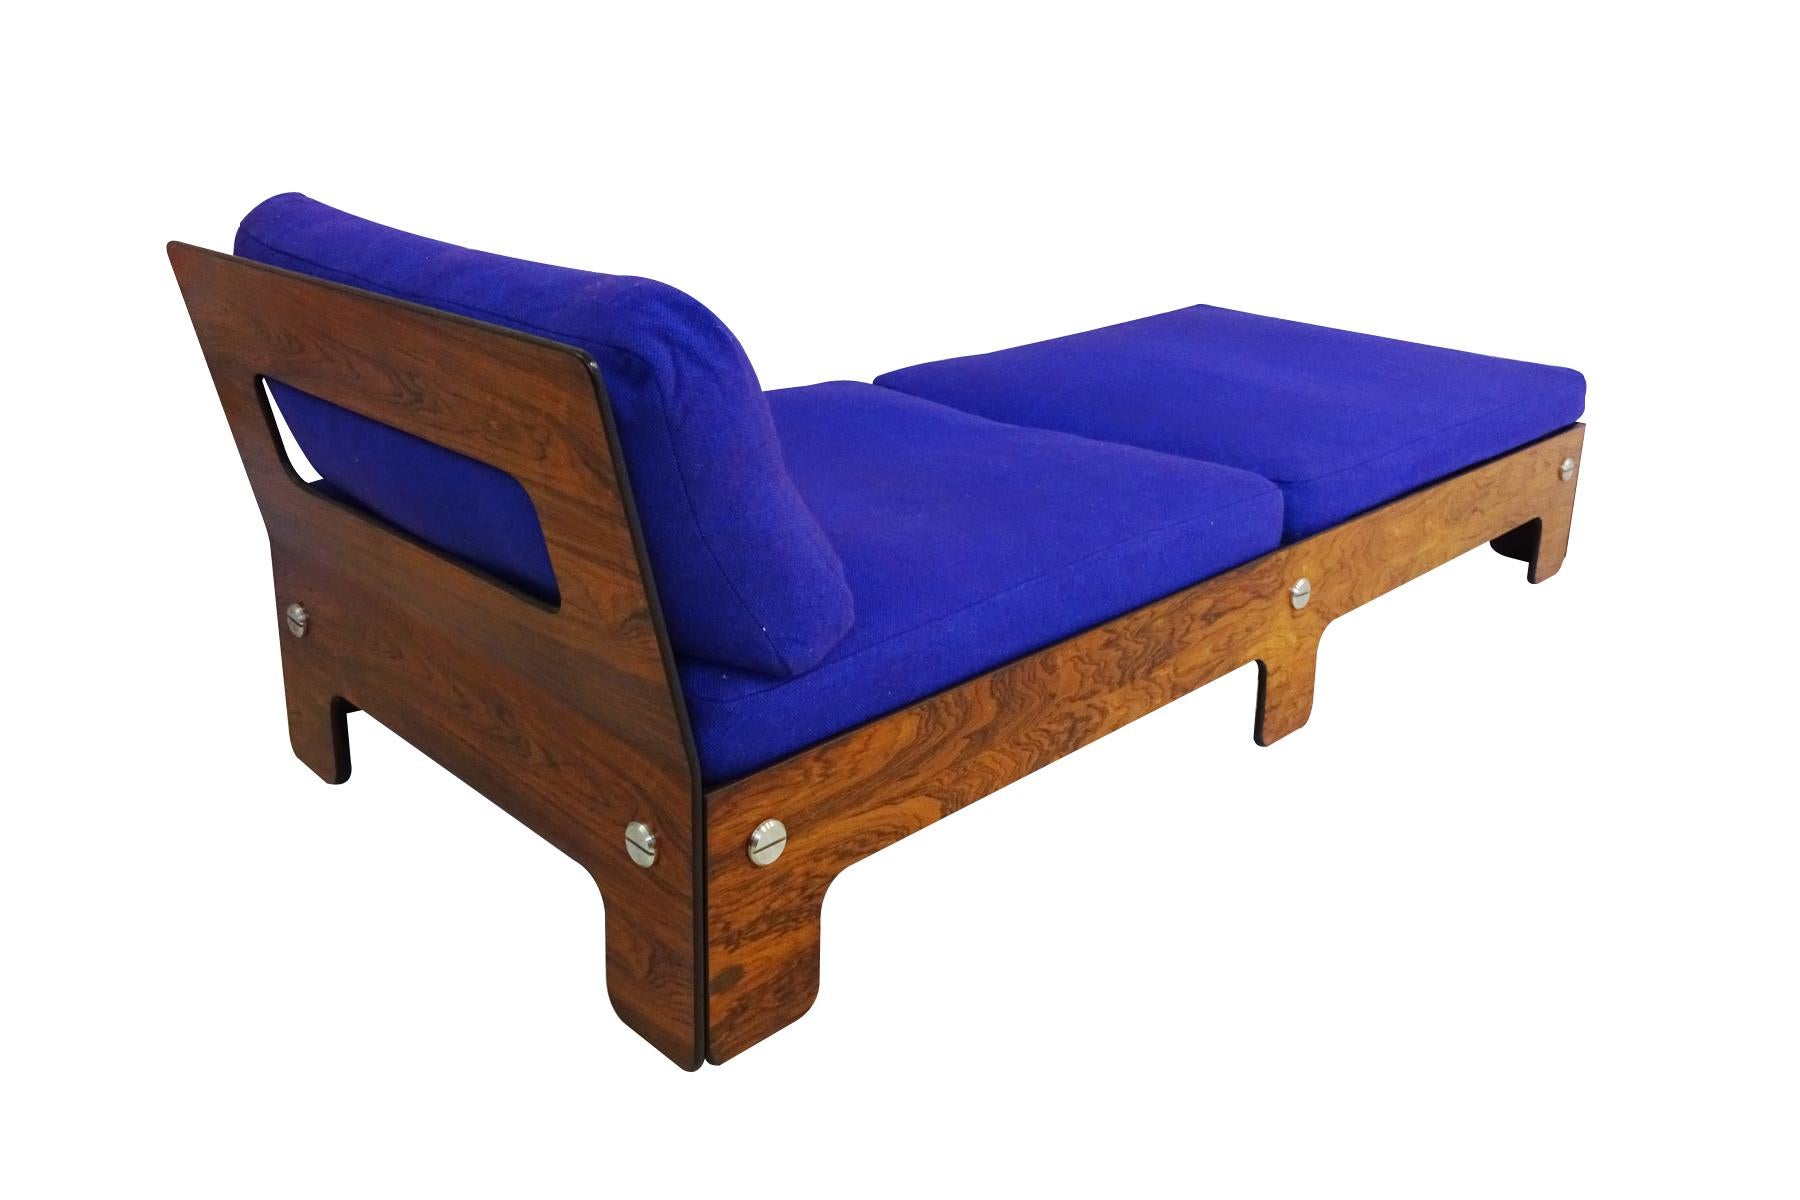 Mid-Century Modern Vintage Midcentury Chaise Longue or Day Bed